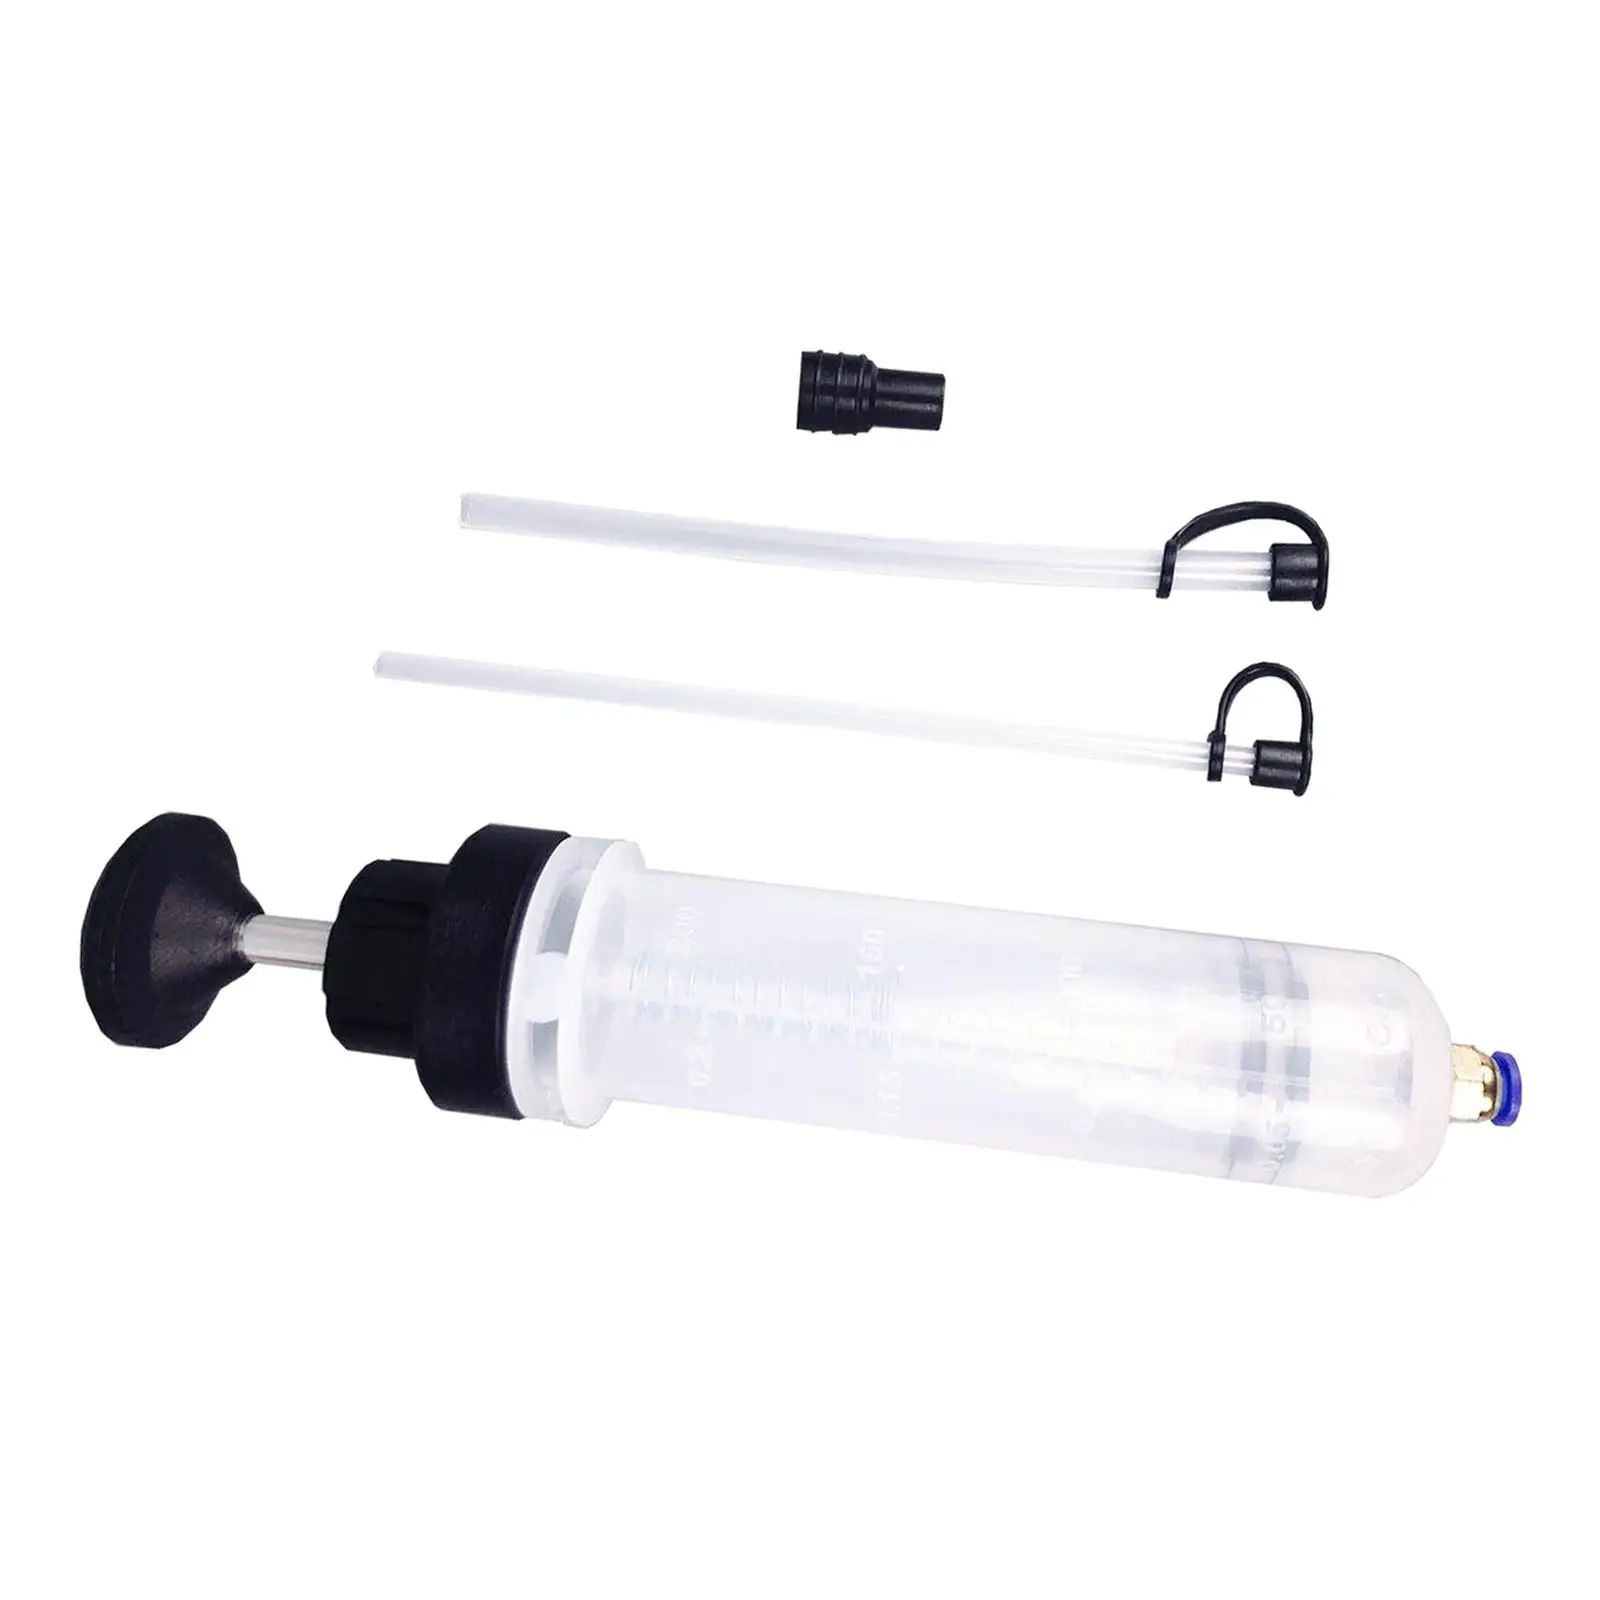 29.5cm Car Automotive Filling Fluid Extractor / Extracting Transmission Hand Pump Complete